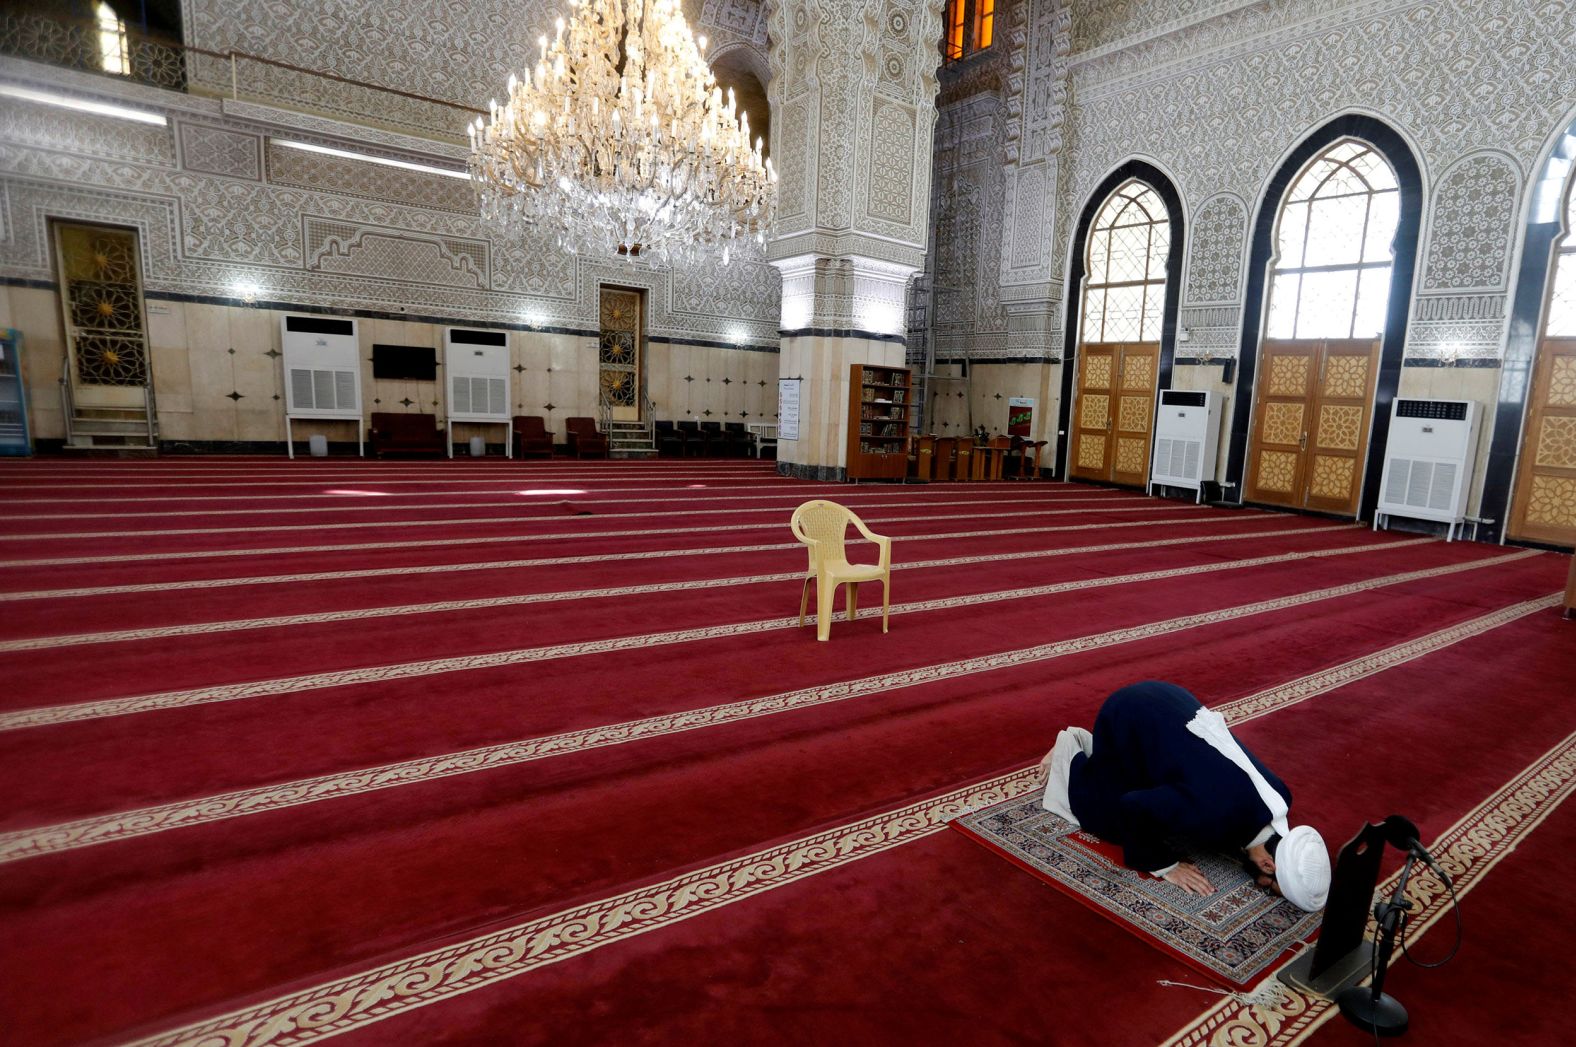 A cleric prays in an empty mosque in Baghdad, Iraq, on March 20.